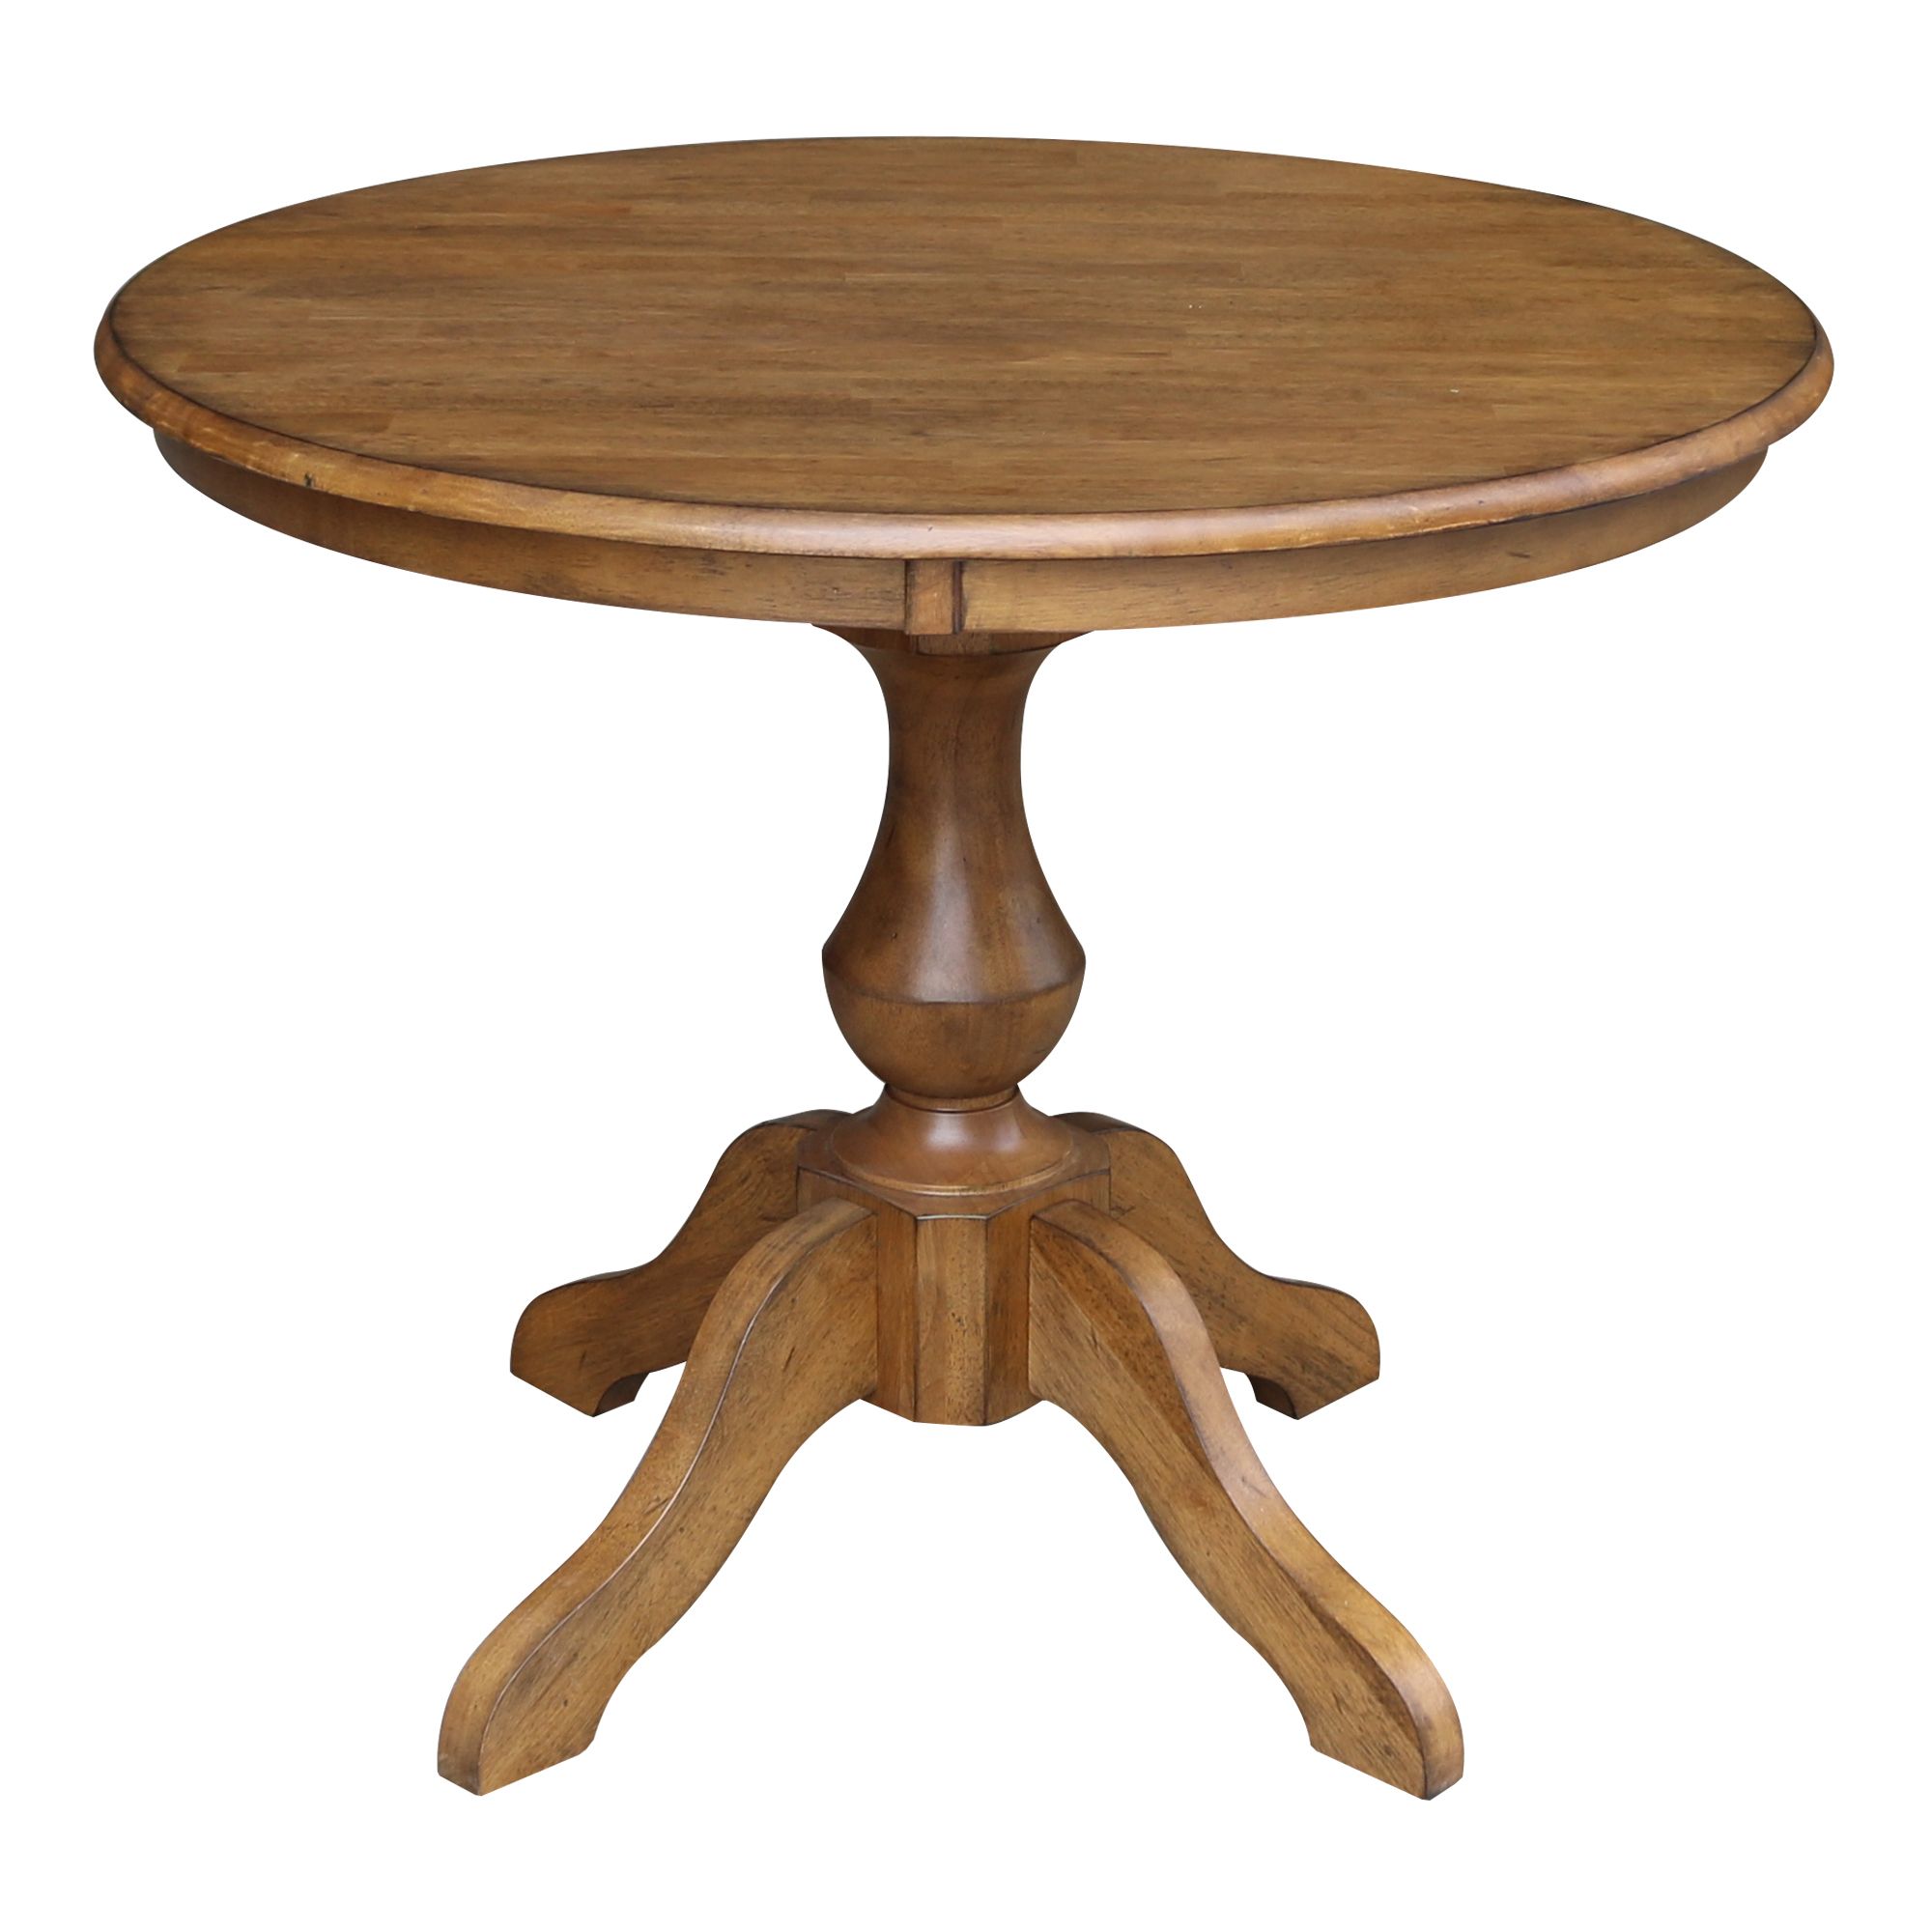 36" Round Pedestal Dining Table – Pecan – Walmart Throughout Most Recent Round Pedestal Dining Tables With One Leaf (View 2 of 15)